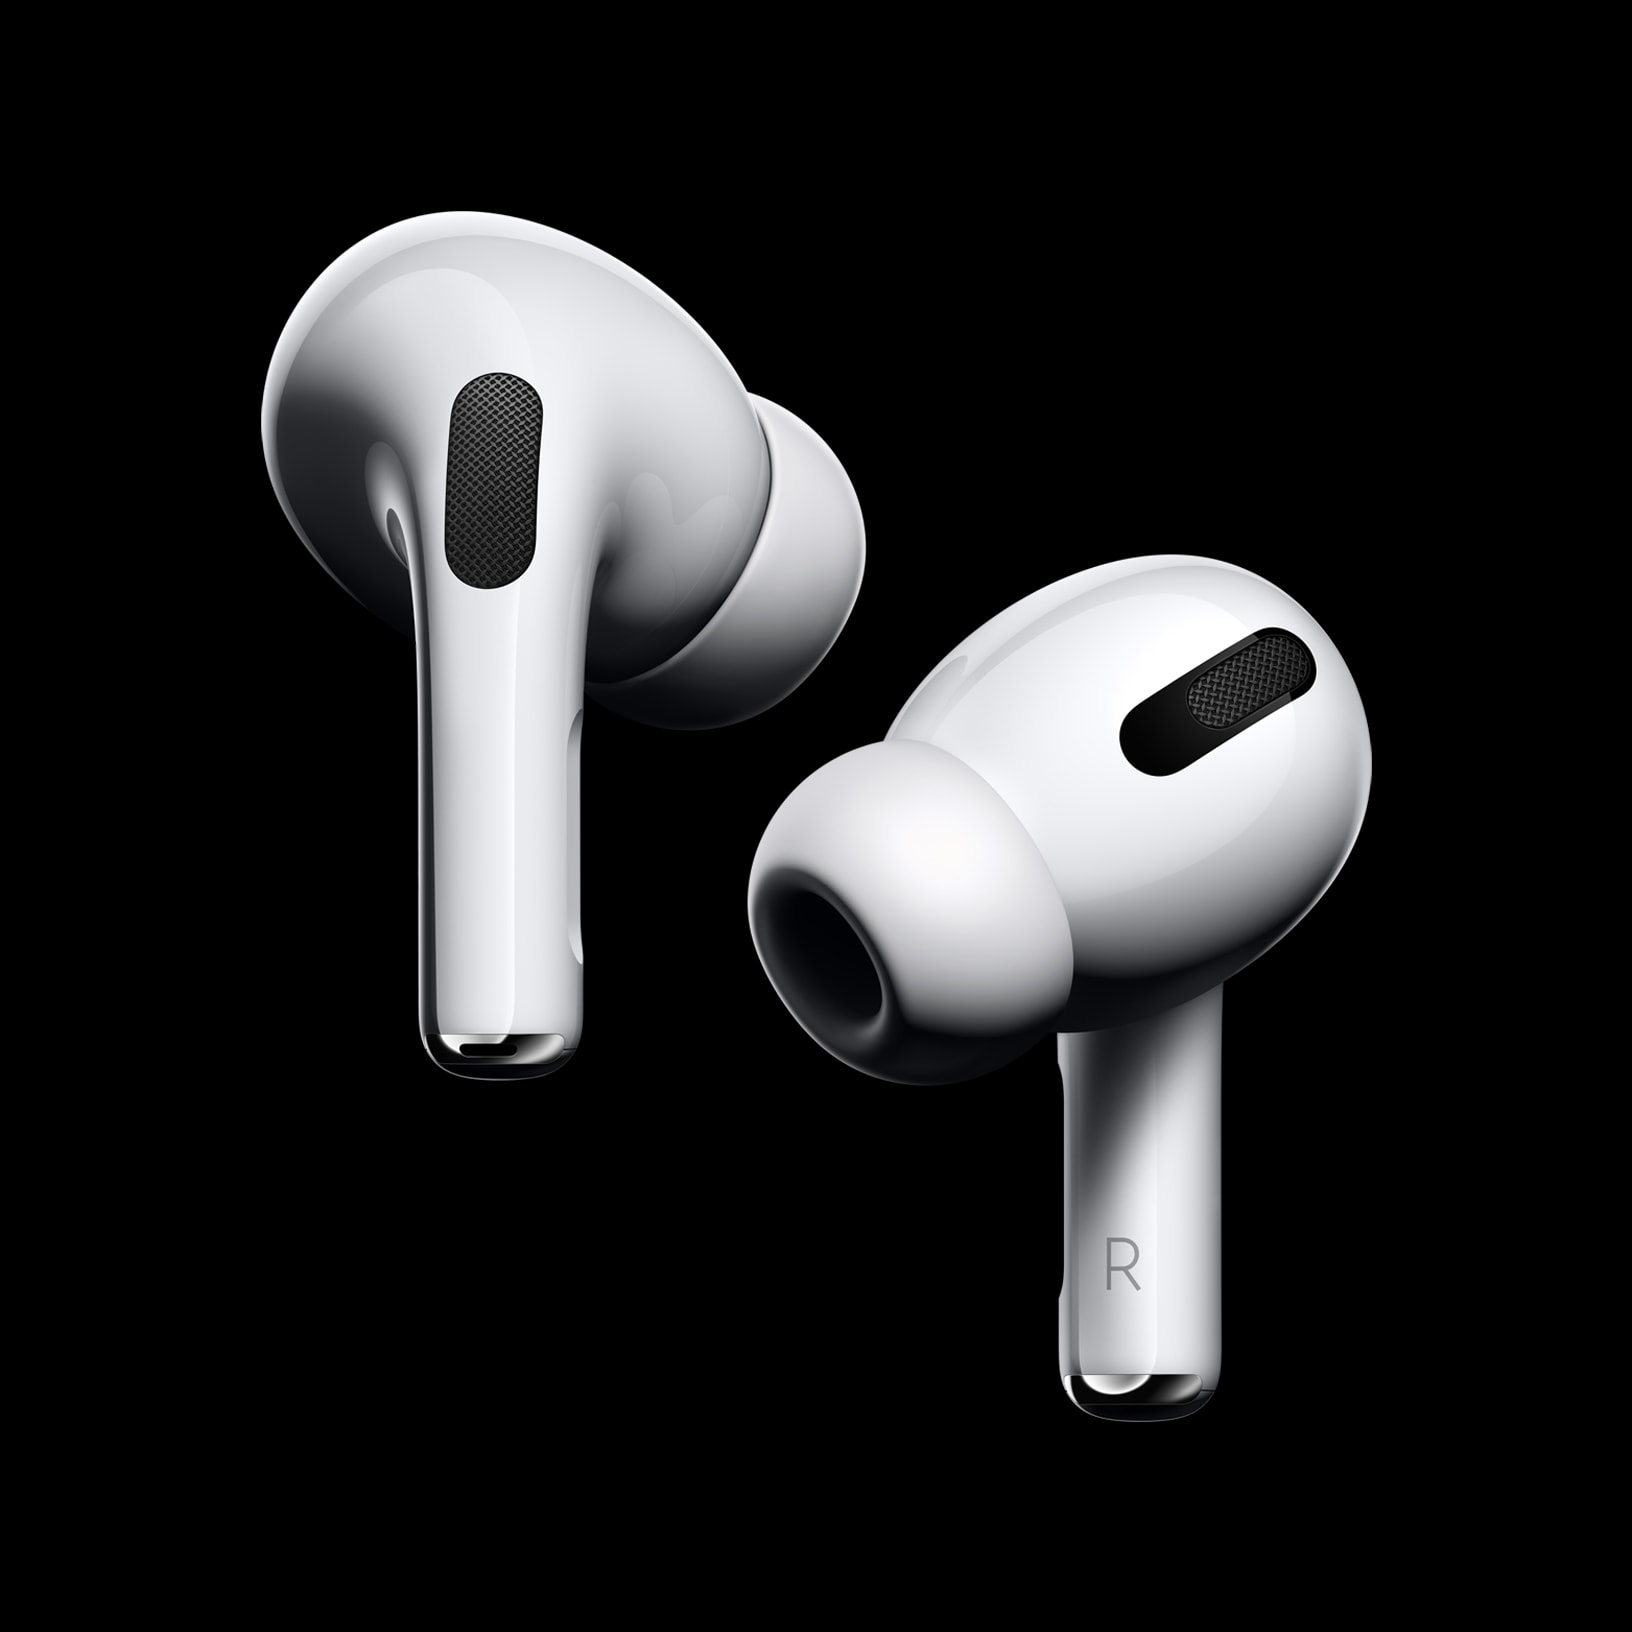 AirPods Pro undoubtedly will become a big hit this Christmas.